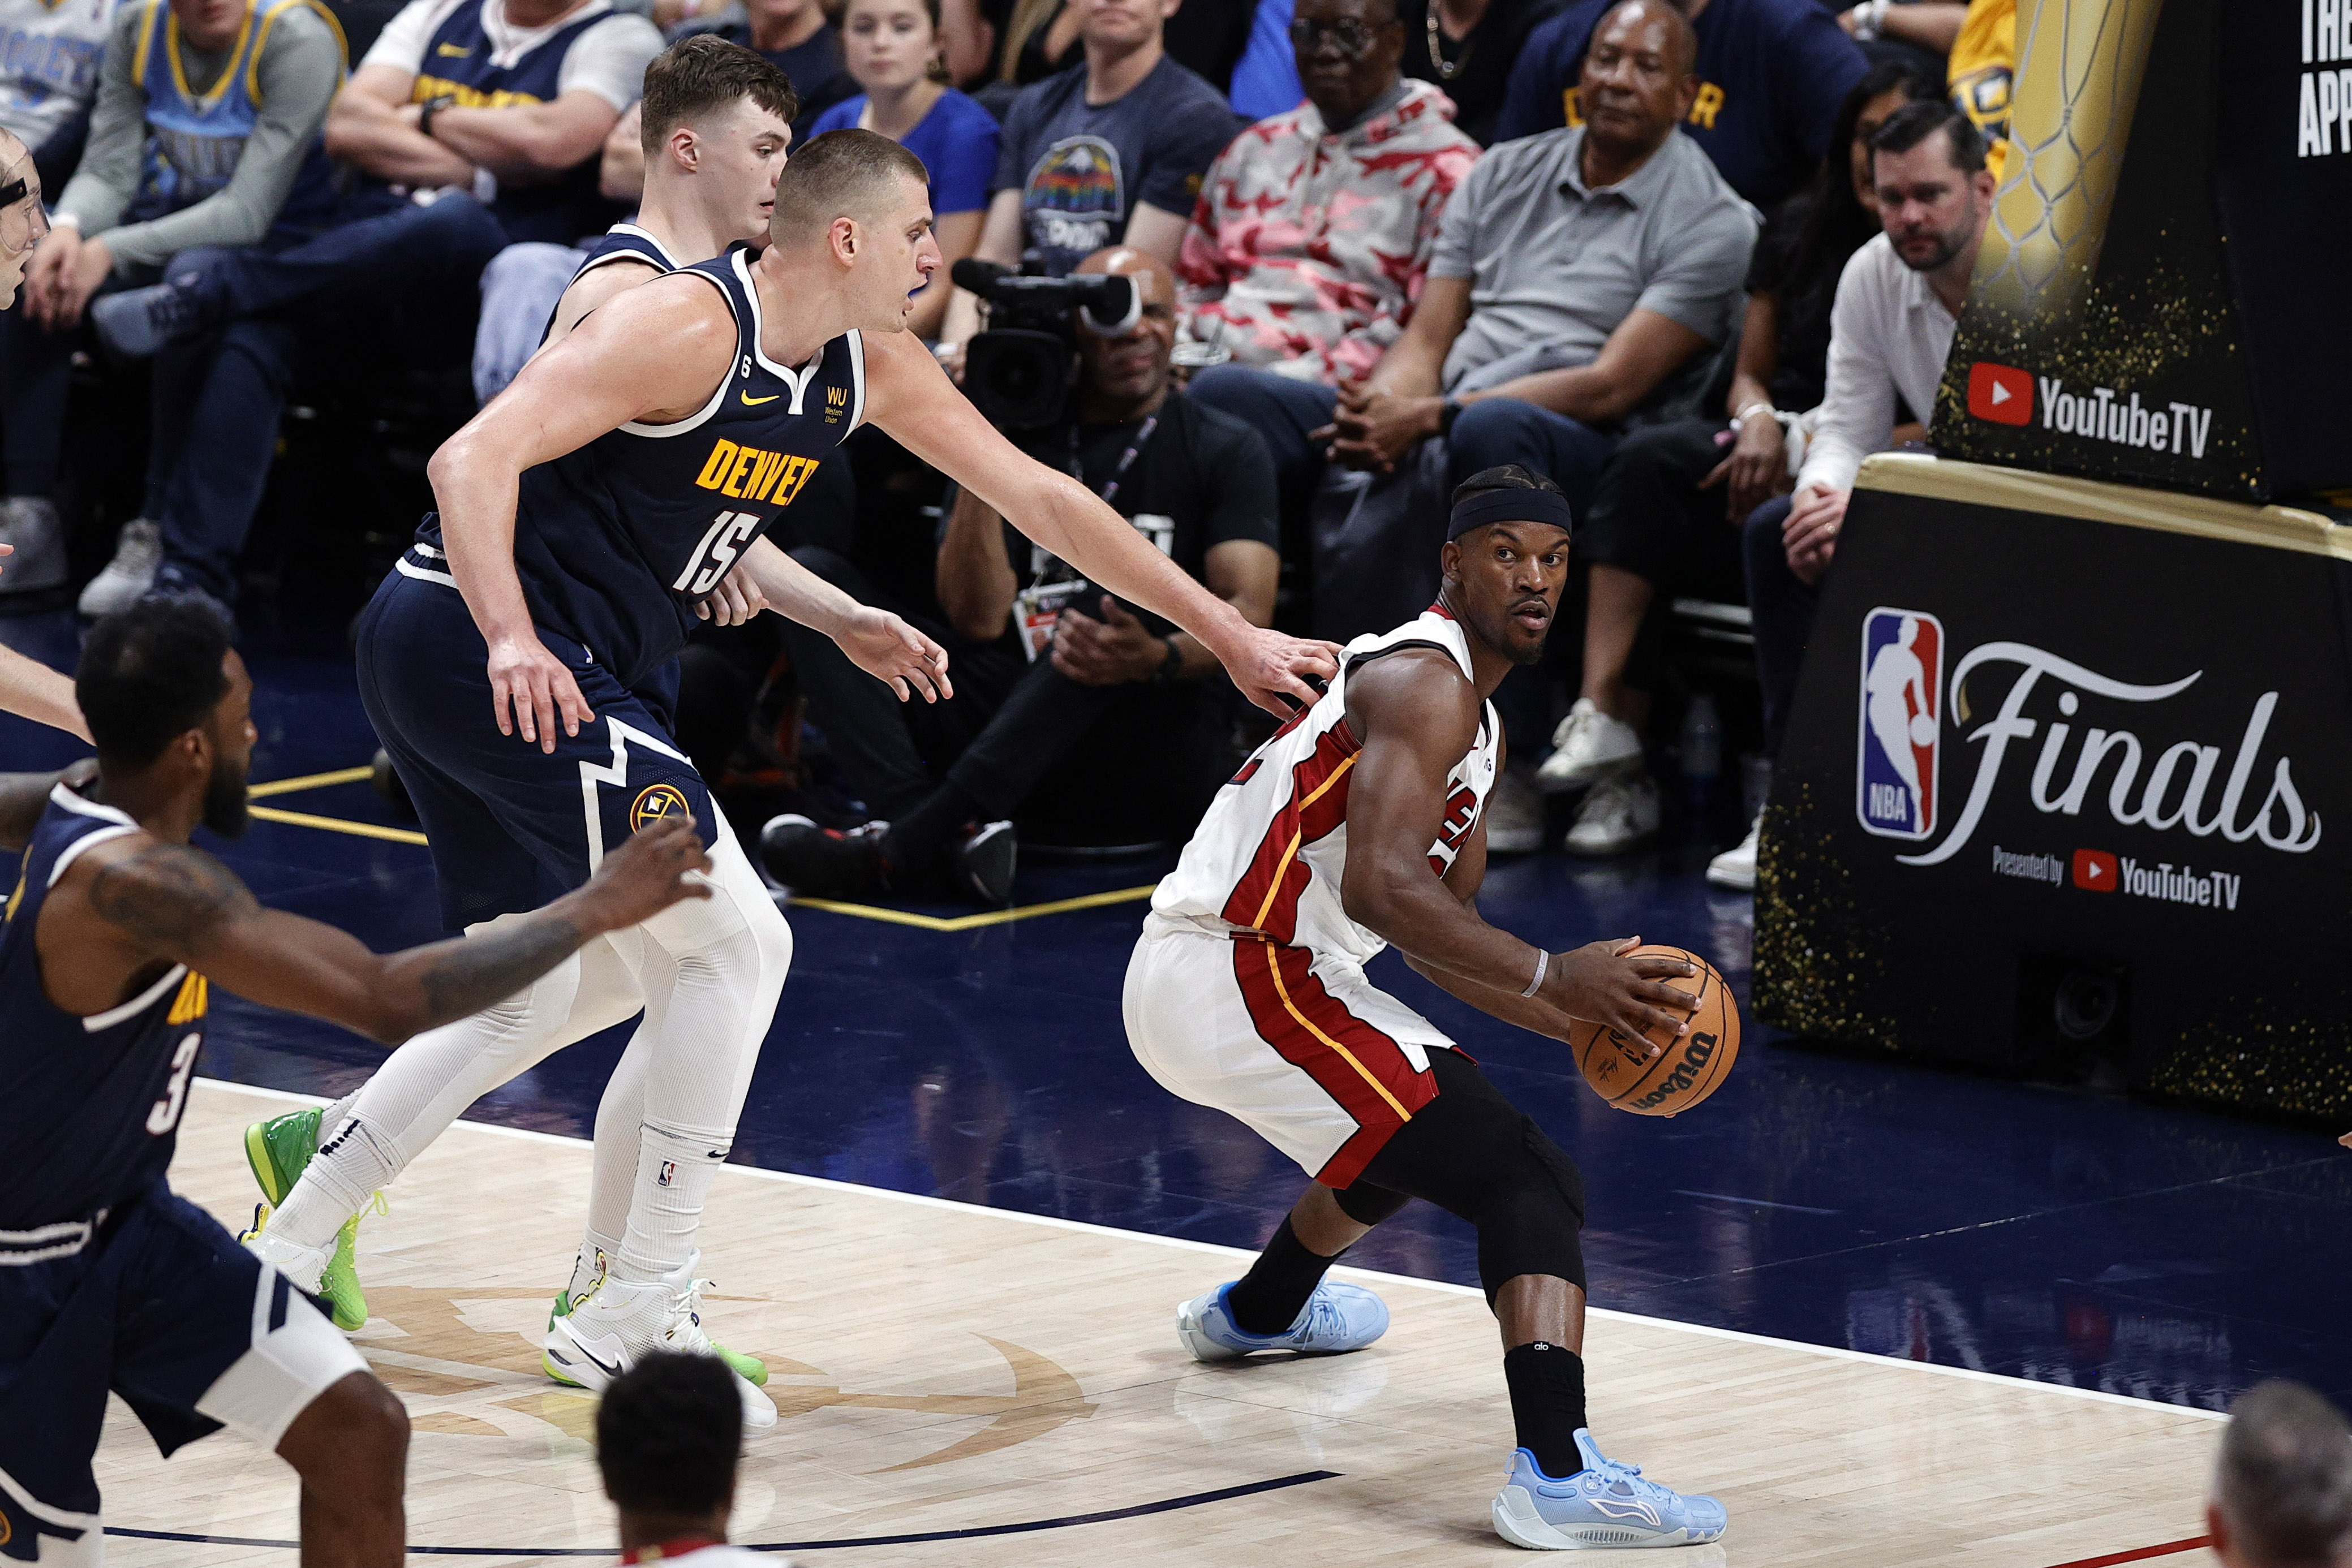 Jun 4, 2023; Denver, CO, USA; Miami Heat forward Jimmy Butler (22) controls the ball against Denver Nuggets center Nikola Jokic (15) and guard Christian Braun (0) in the second half in game two of the 2023 NBA Finals at Ball Arena. Mandatory Credit: Isaiah J. Downing-USA TODAY Sports